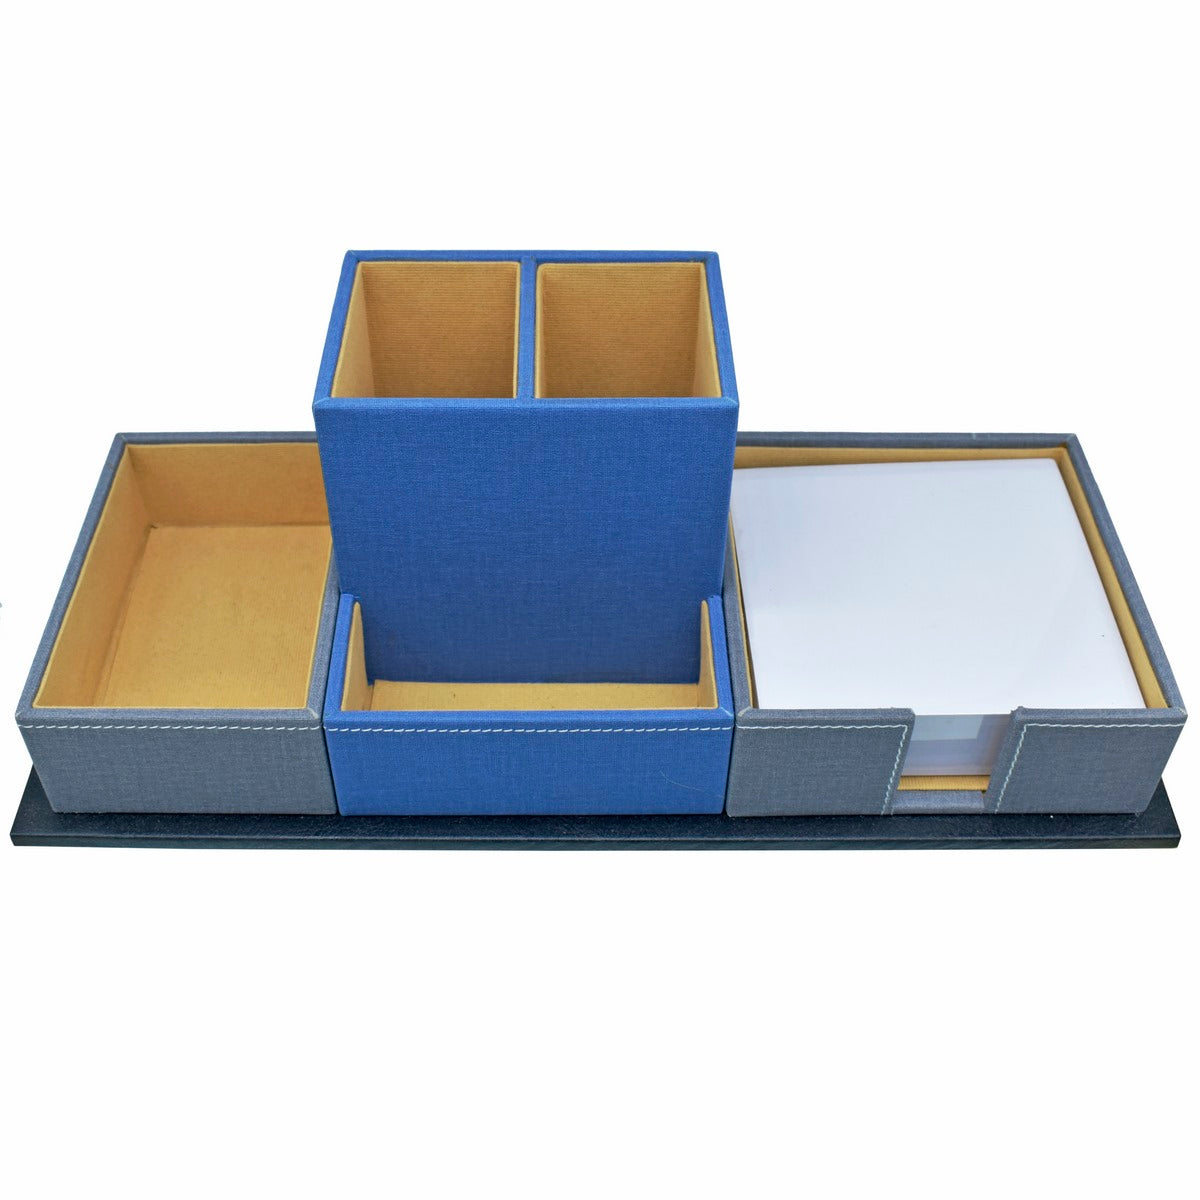 Blue & Grey 4in1 Premium Leather Table Stationery Organizer Combo Set - For Office Use, Personal Use, Corporate Gifting, Return Gift